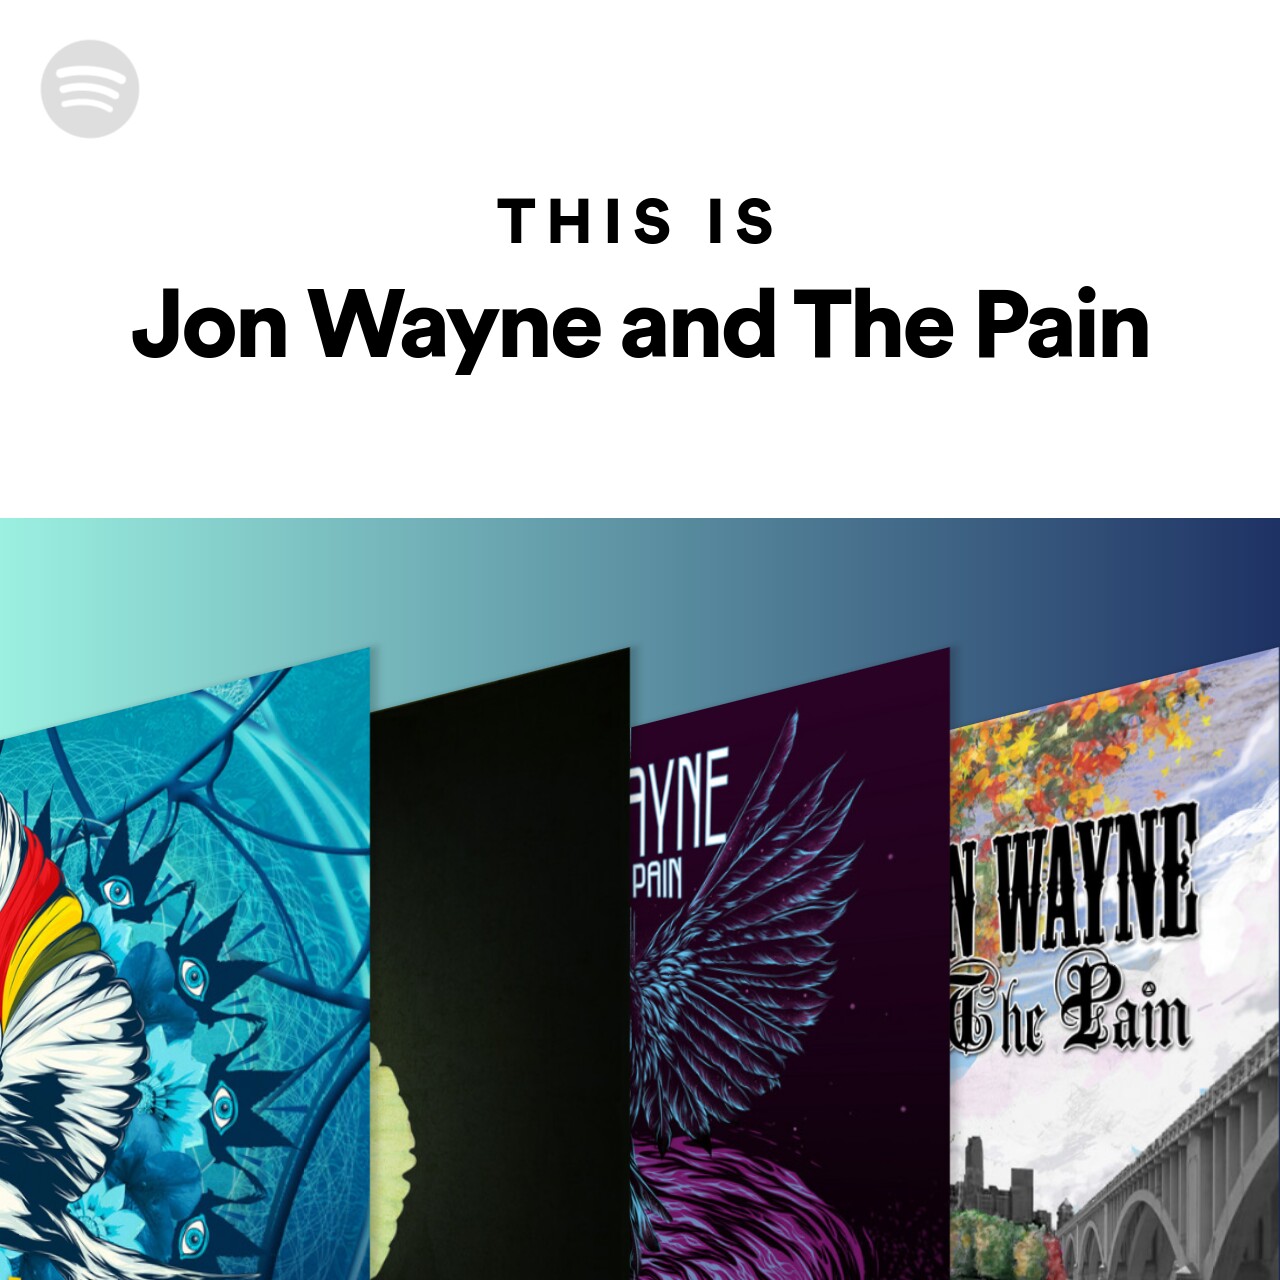 This Is Jon Wayne and The Pain